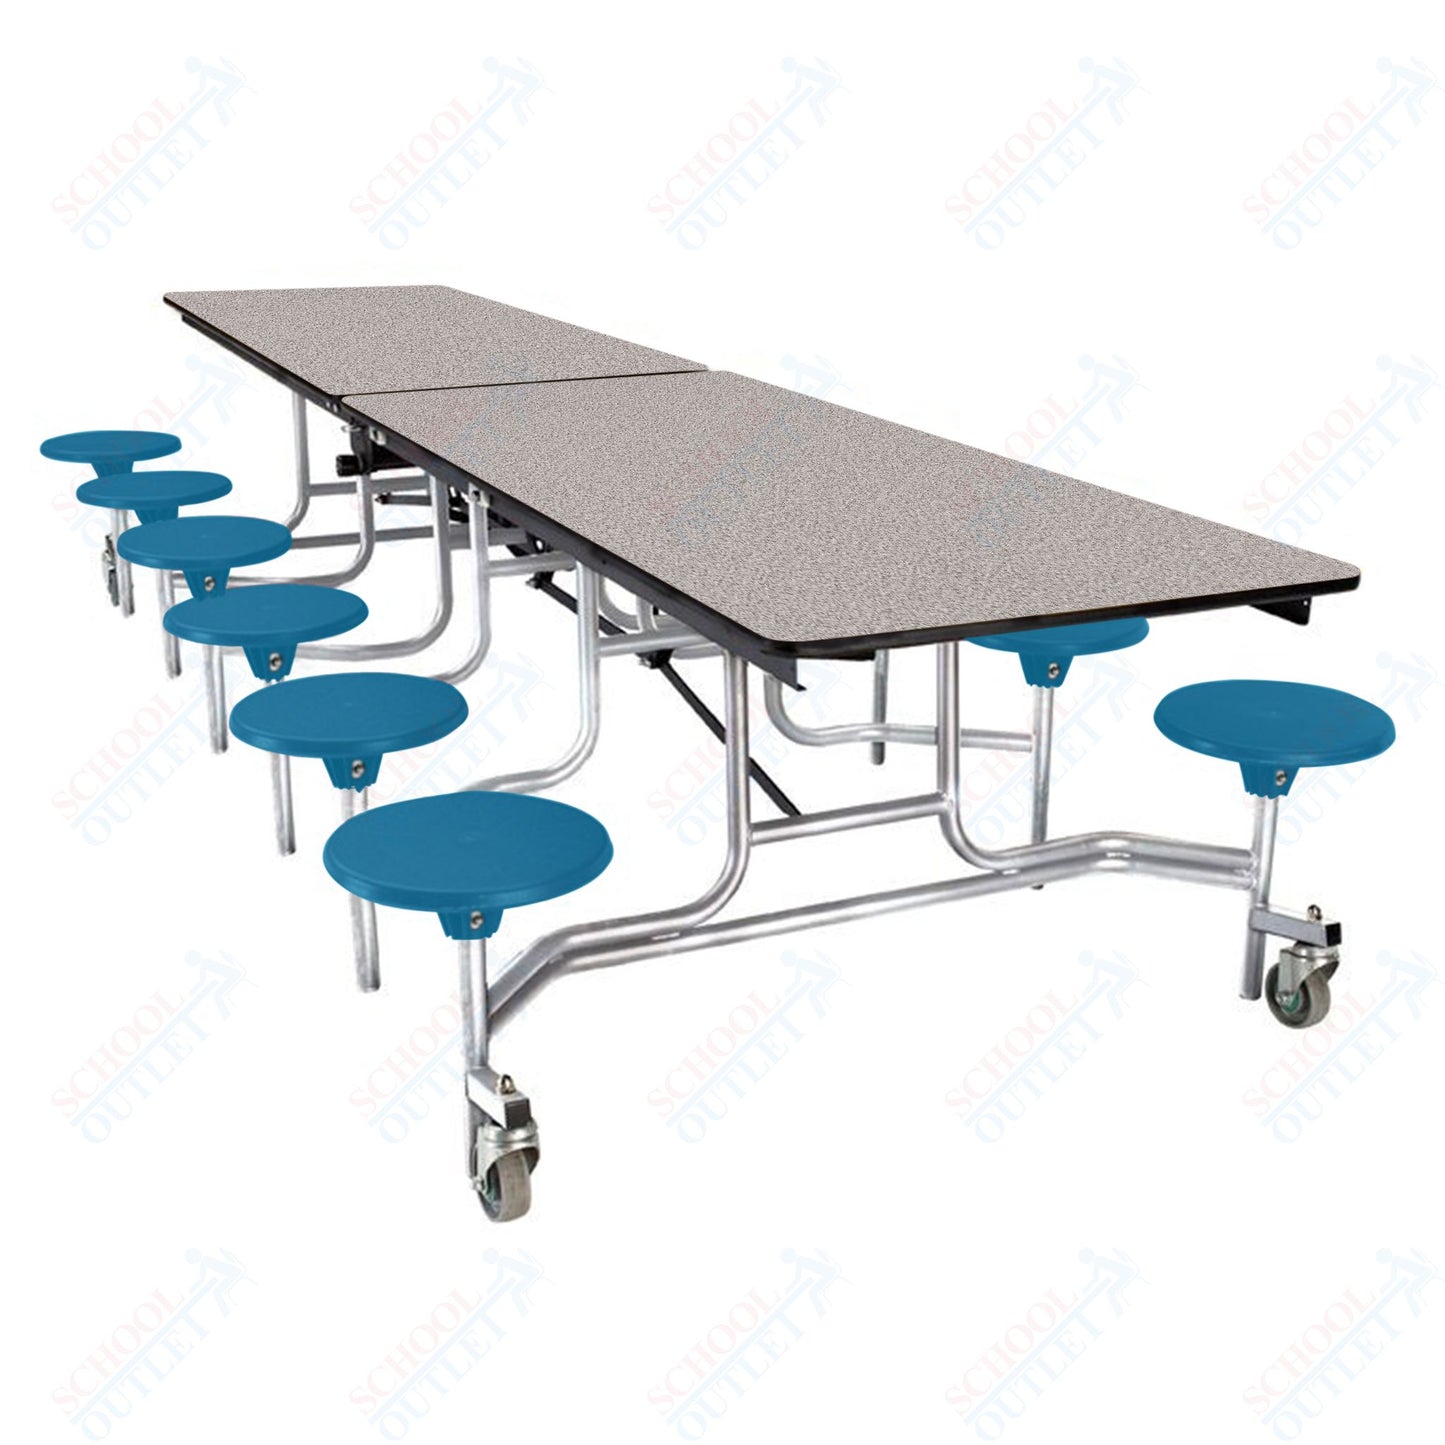 NPS Mobile Cafeteria Table - 30" W x 10' L - 12 Stools  - Plywood Core - Protect Edge - Chrome Frame